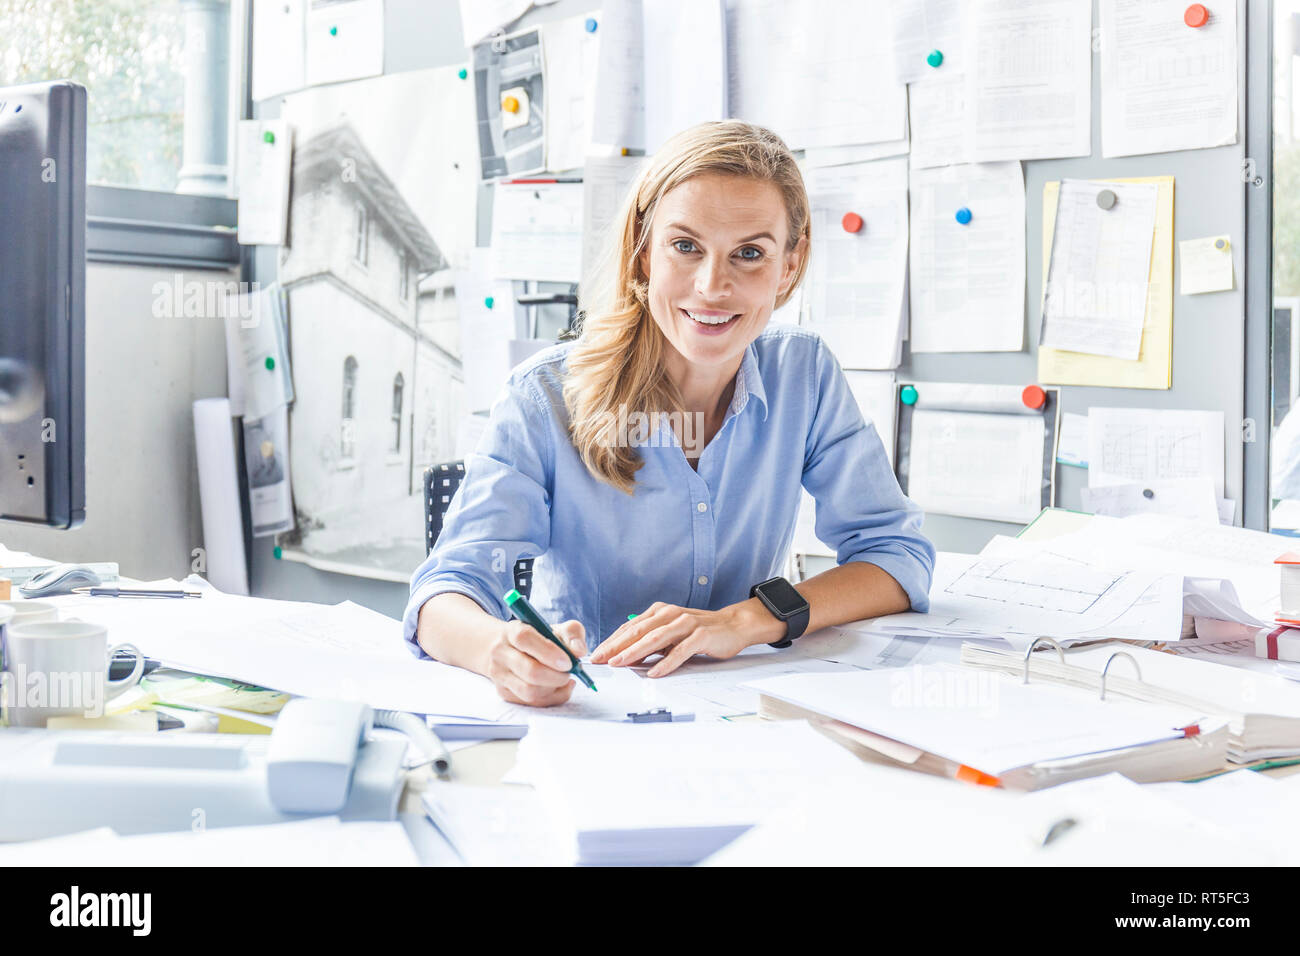 Portrait of smiling woman doing paperwork at desk in office Stock Photo